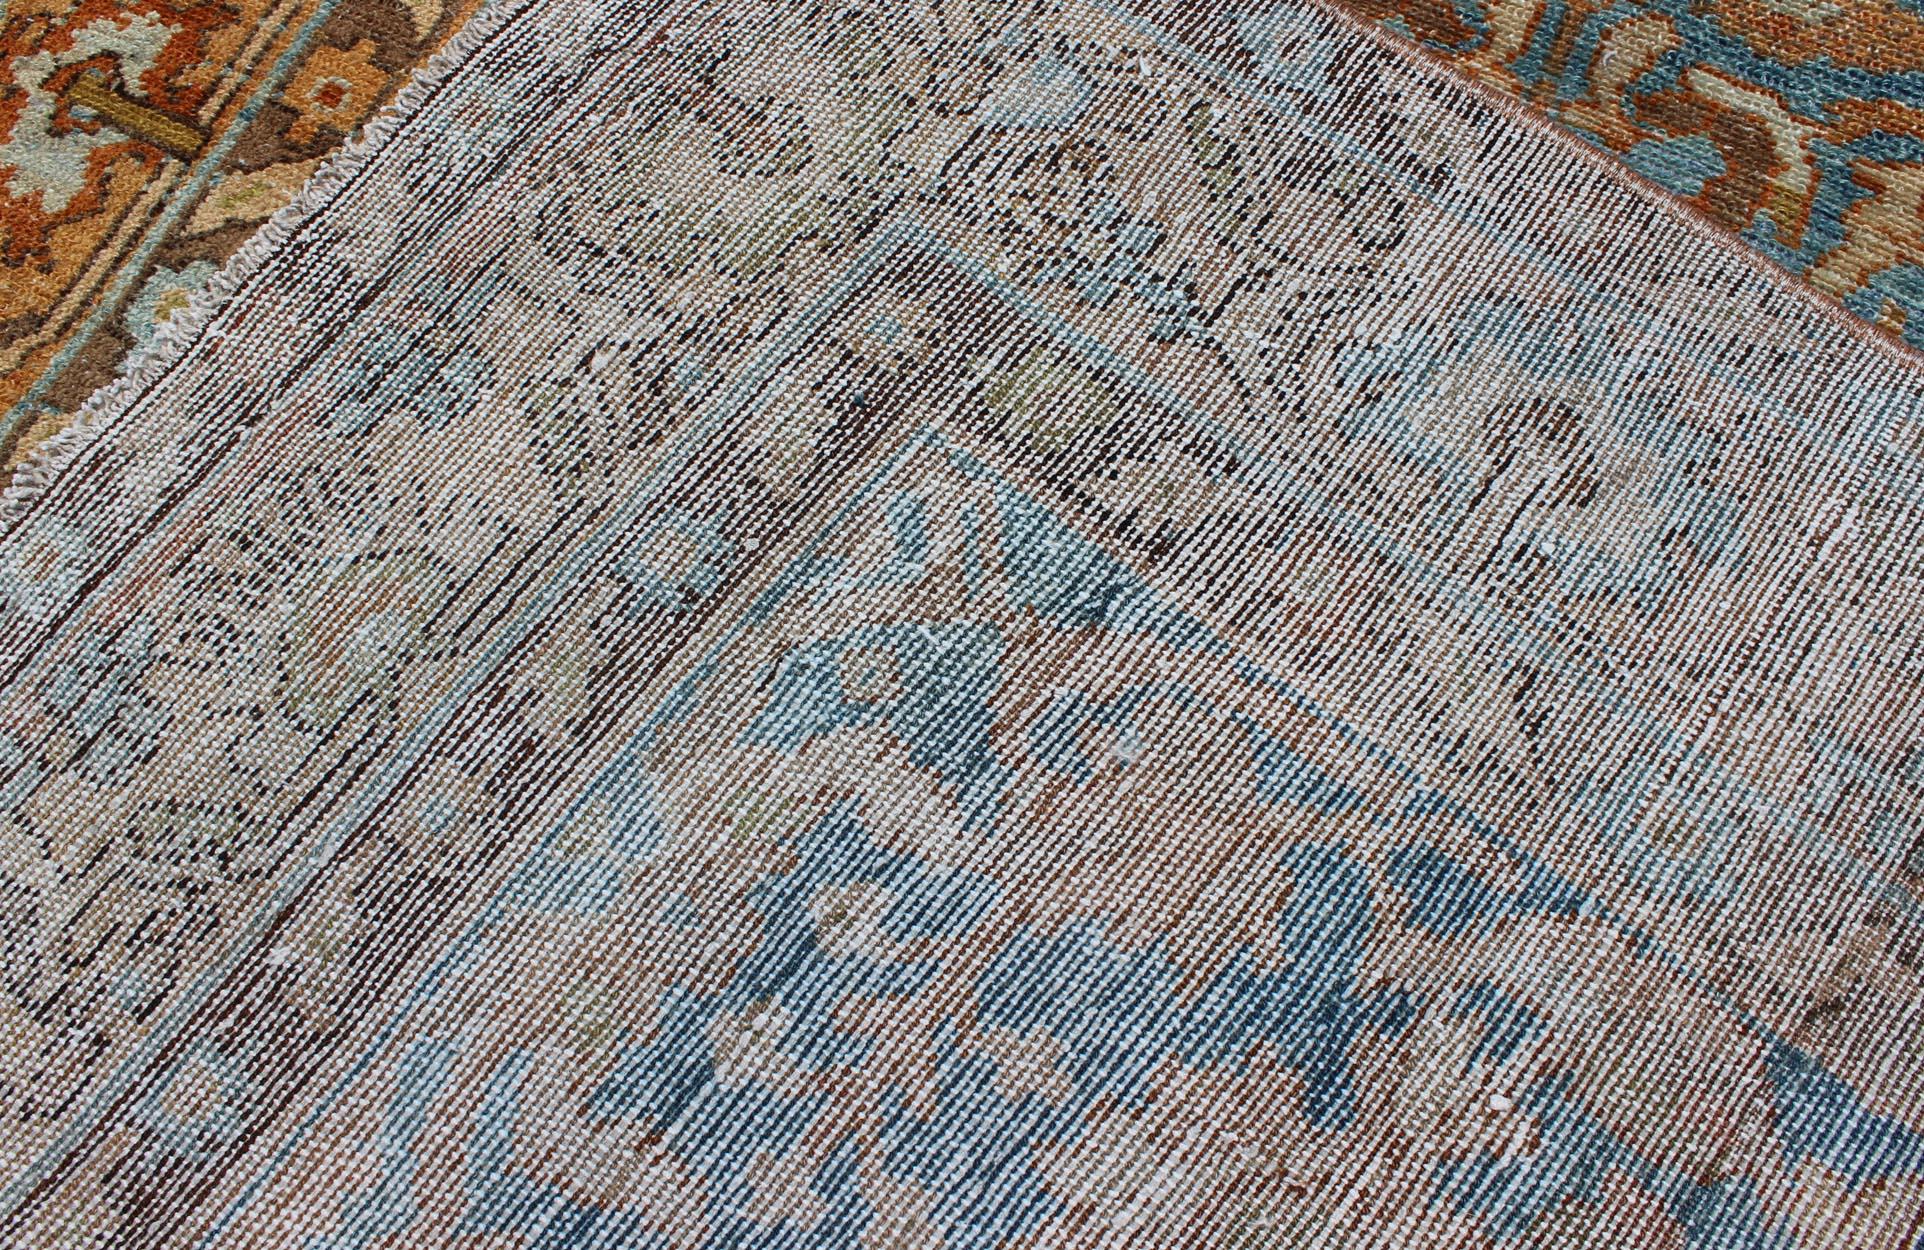 Vibrant Antique Persian Malayer Rug in Shades of Rust, Orange, and Blue For Sale 6